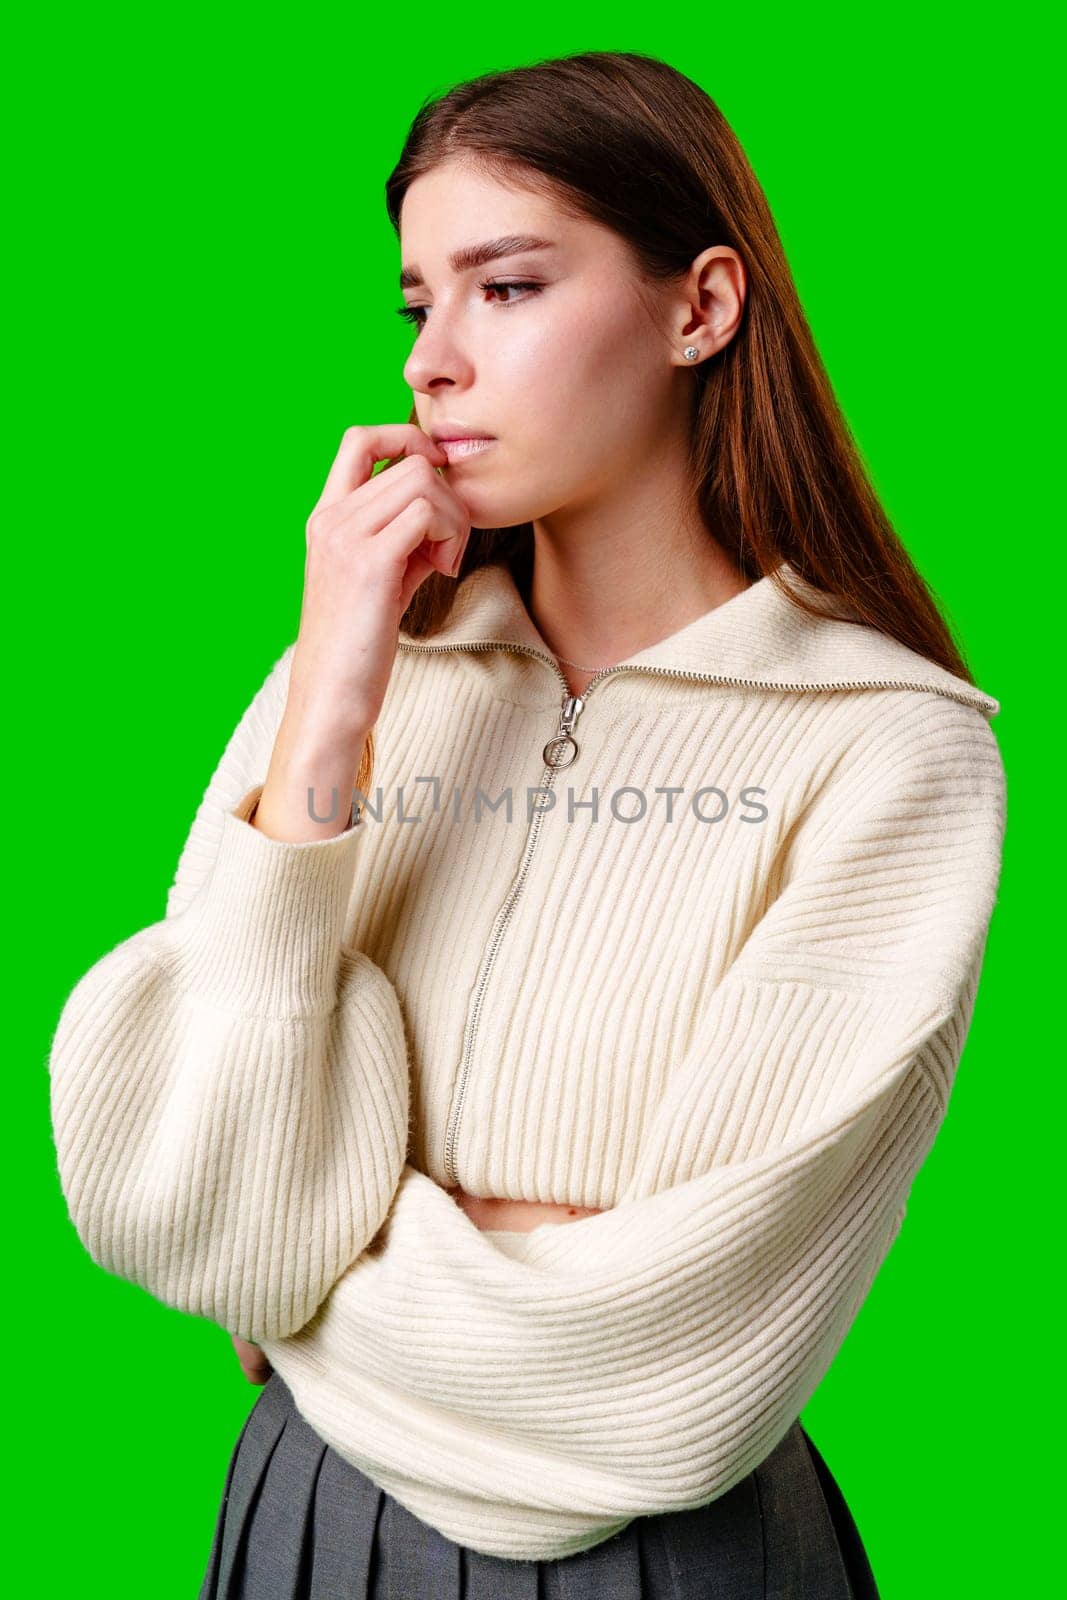 Young Woman Contemplating Deeply Against a Vibrant Green Background by Fabrikasimf